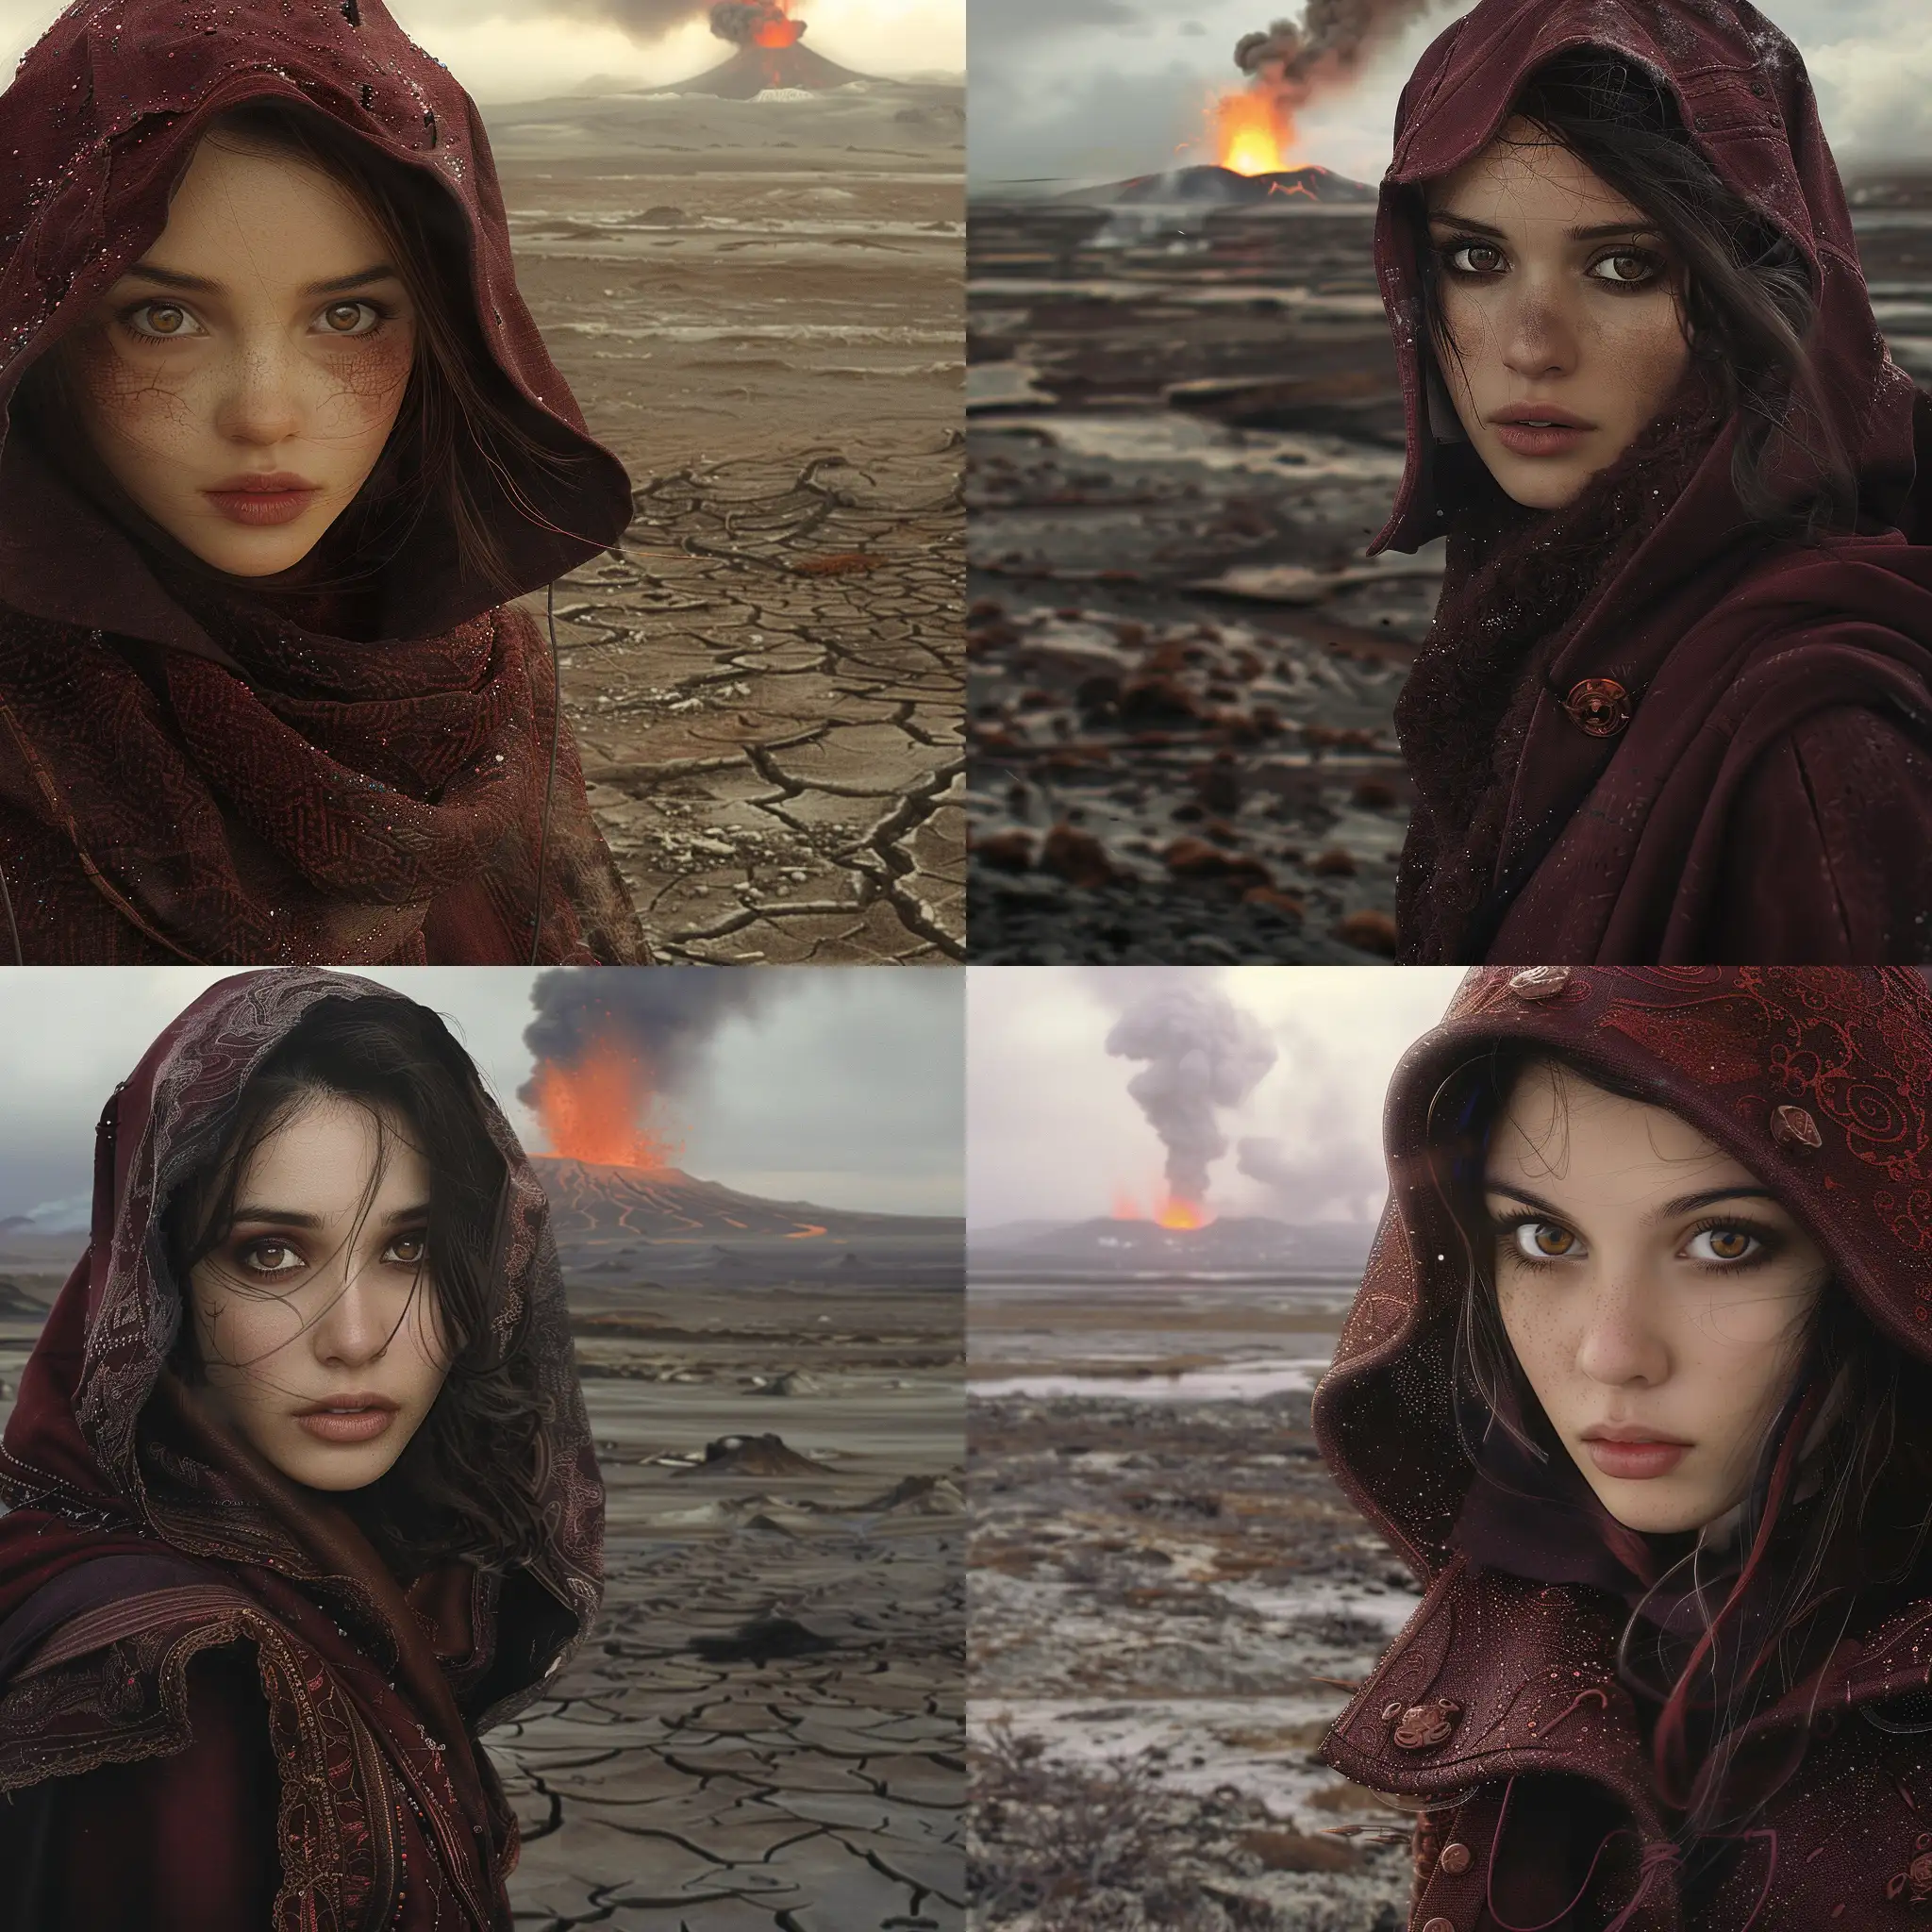 Mysterious-Woman-in-Red-Coat-Walking-through-Apocalyptic-Landscape-with-Erupting-Volcano